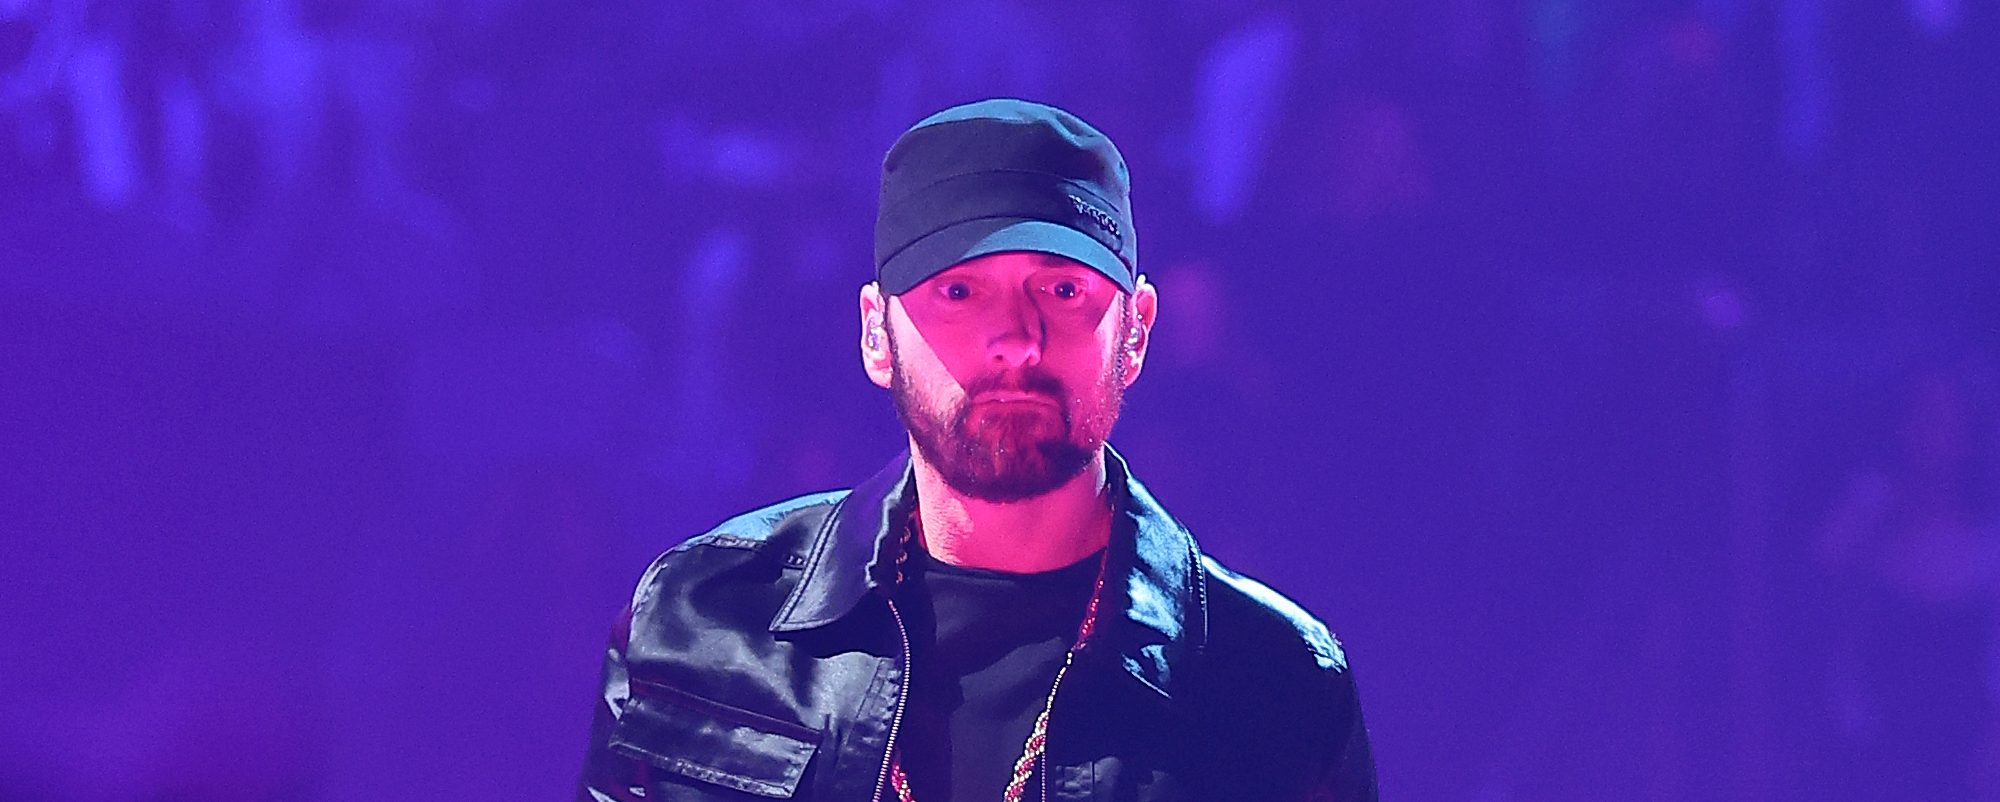 Eminem Tells Republican Vivek Ramaswamy to Stop Rapping to “Lose Yourself”